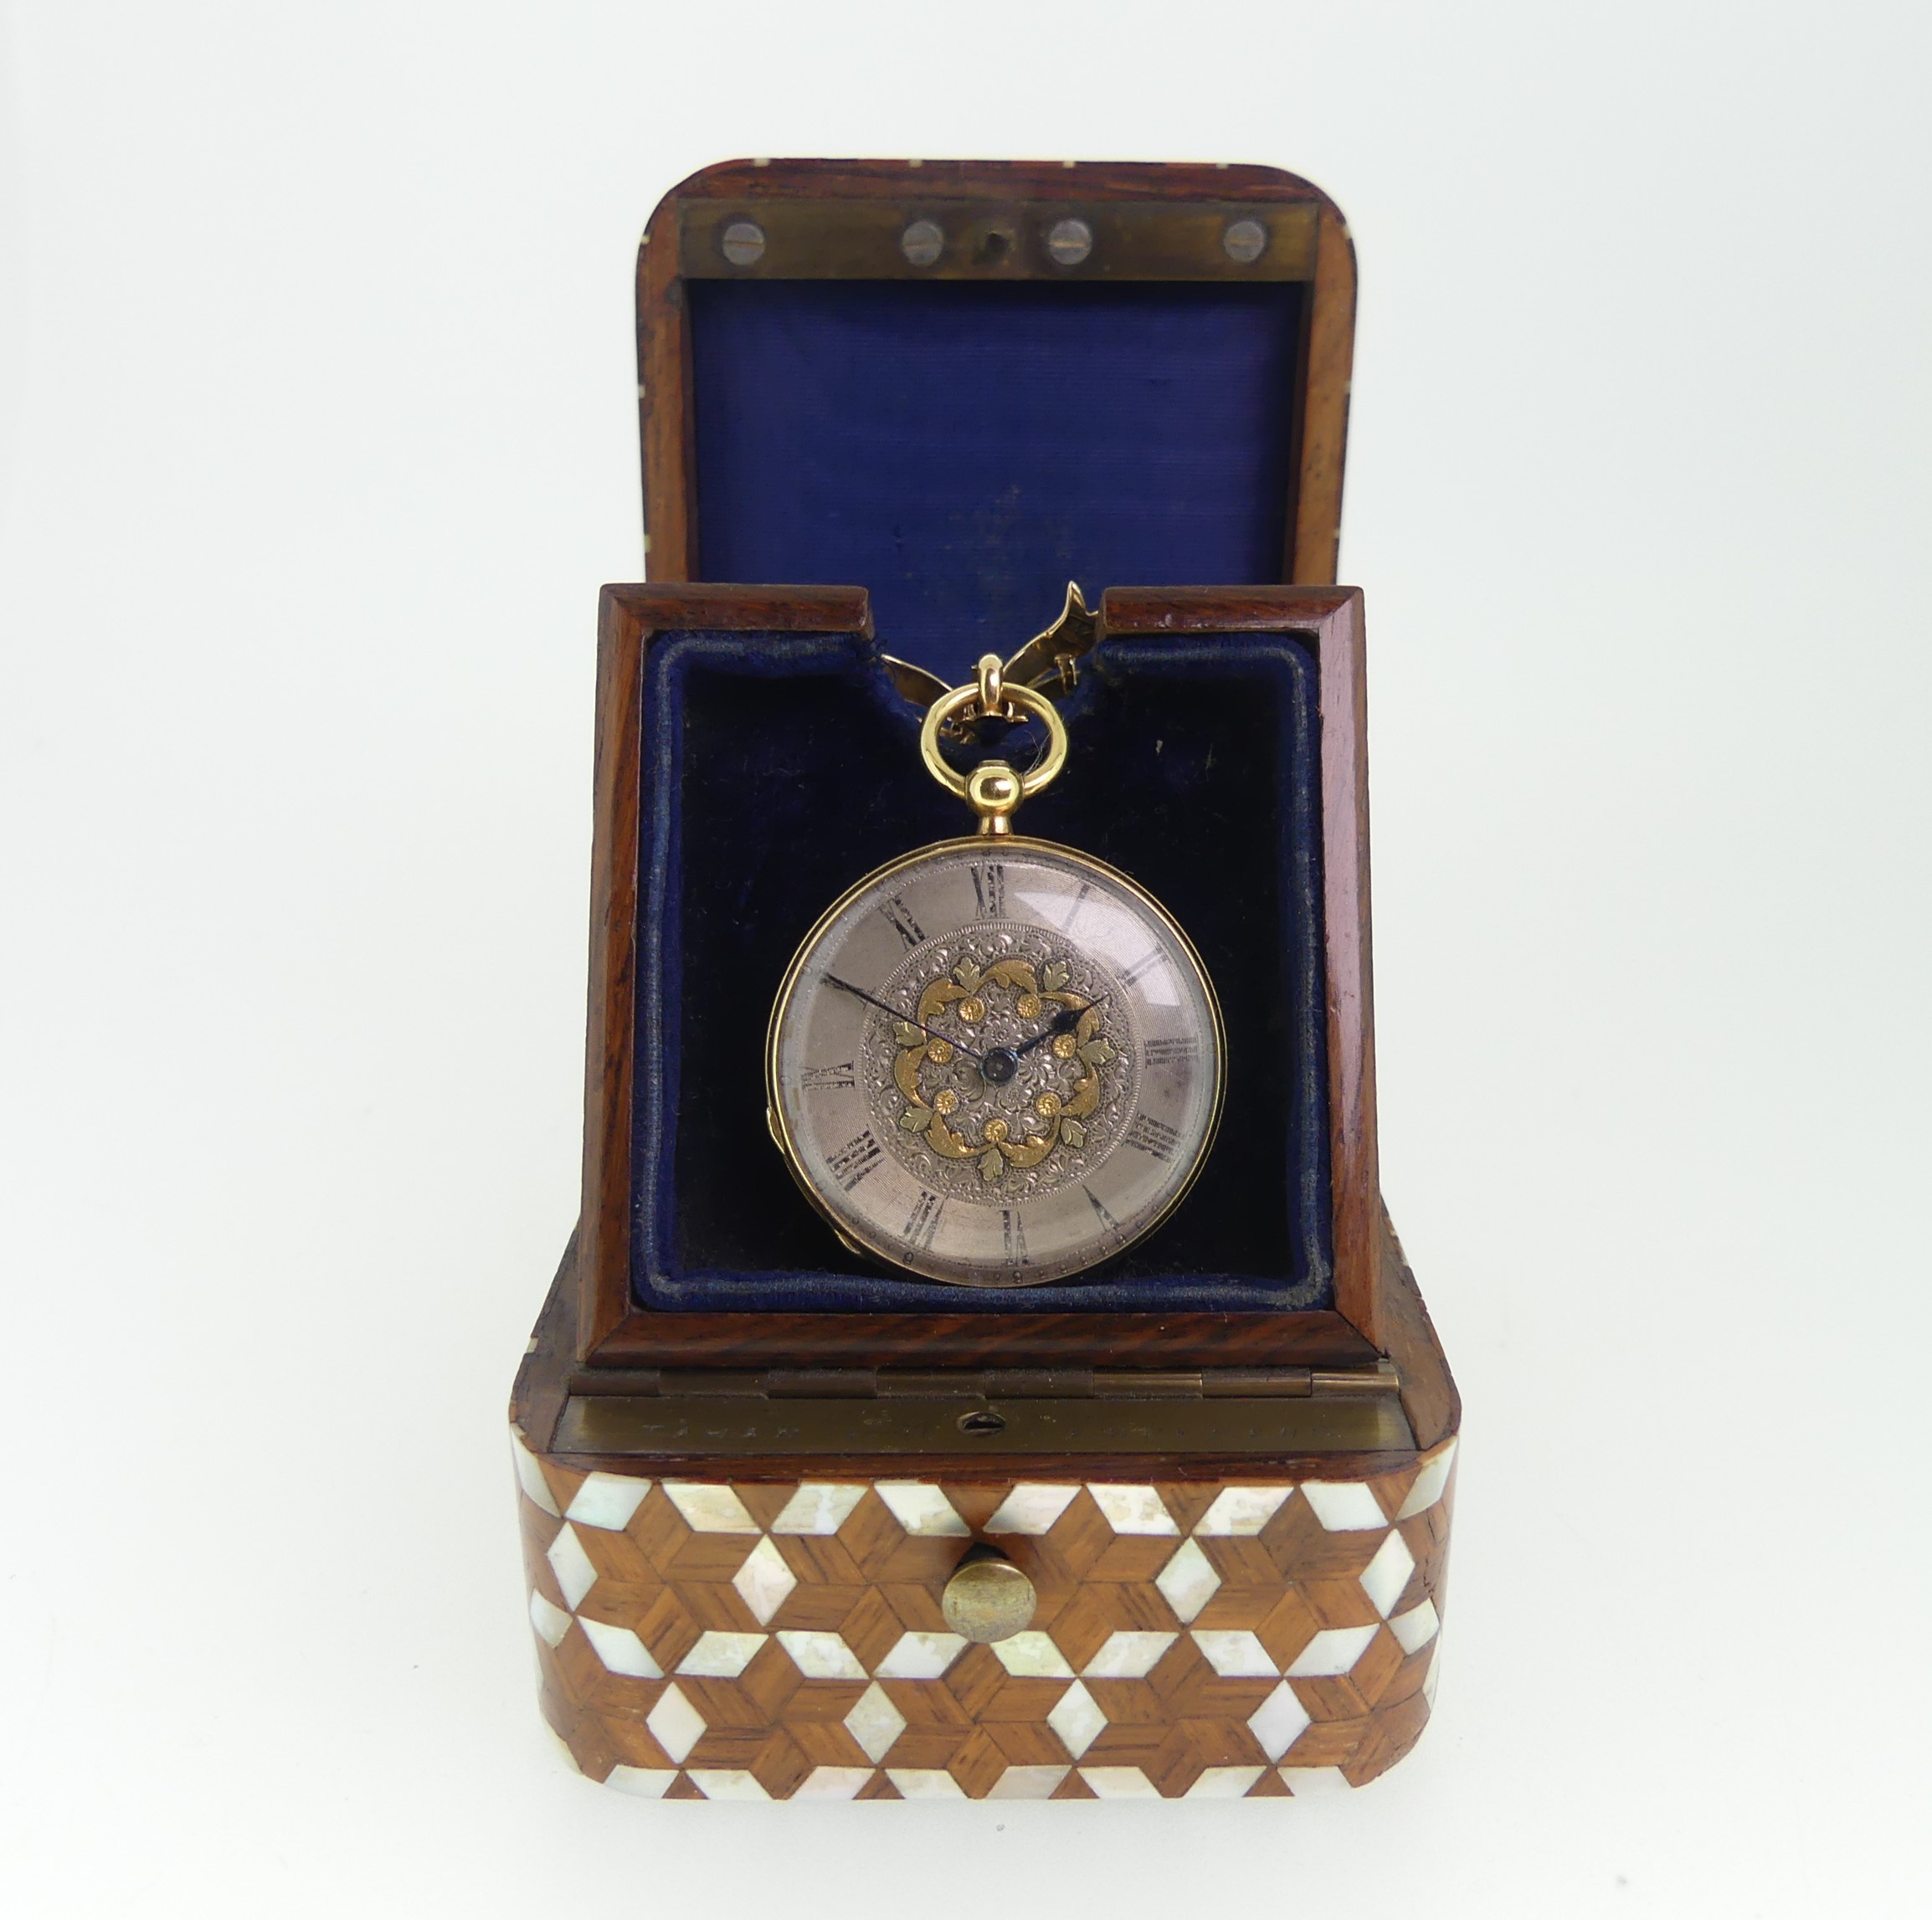 A 19thC Continental 14ct gold, enamel and diamond set Fob Watch, by Rossel & Fils, Geneve, signed on